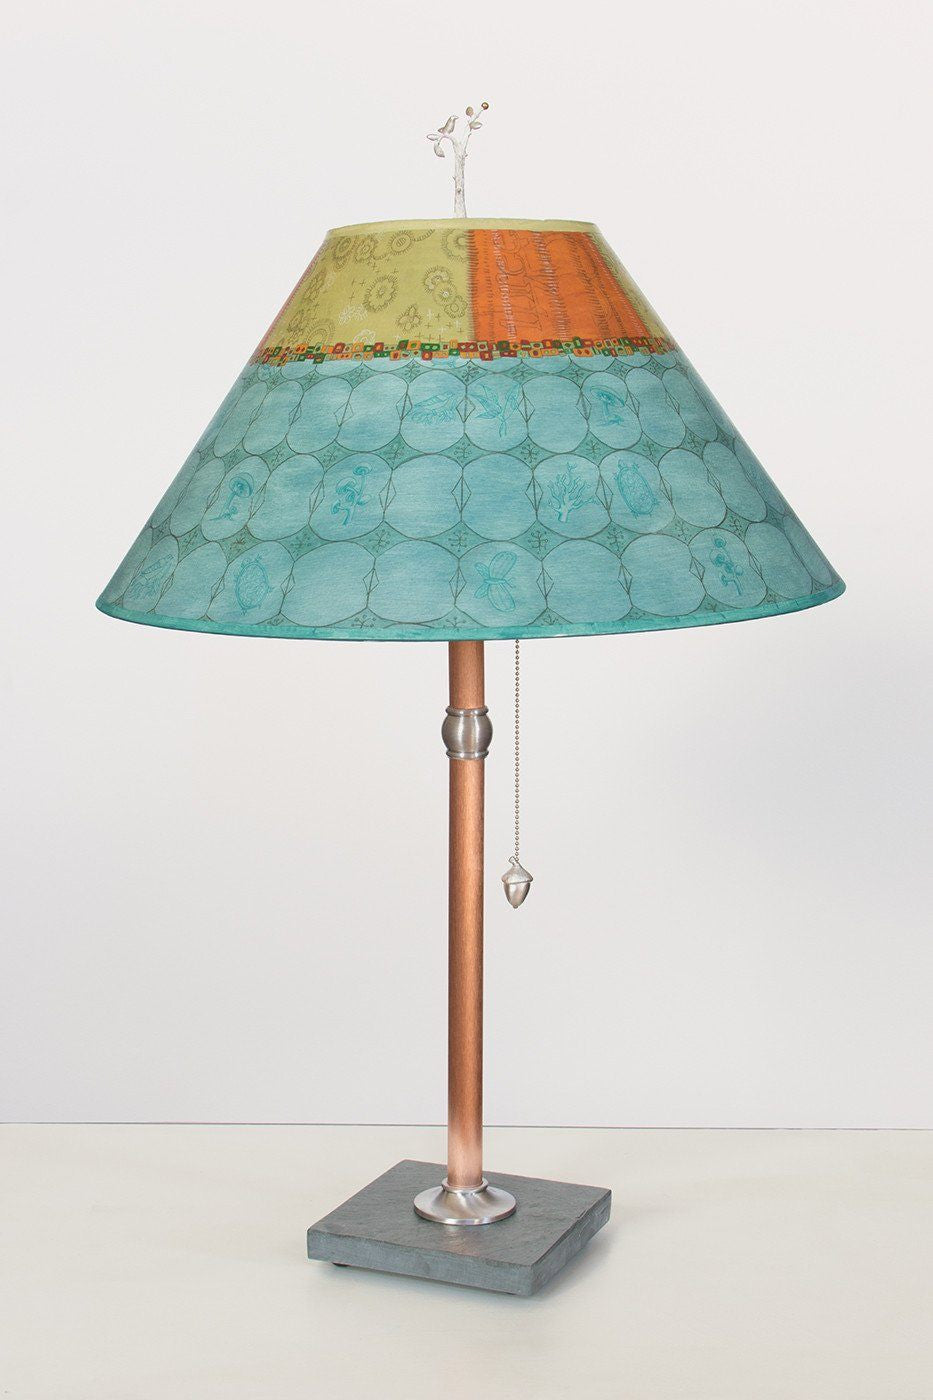 Copper Table Lamp on Vermont Slate with Large Conical Shade in Paradise Pool